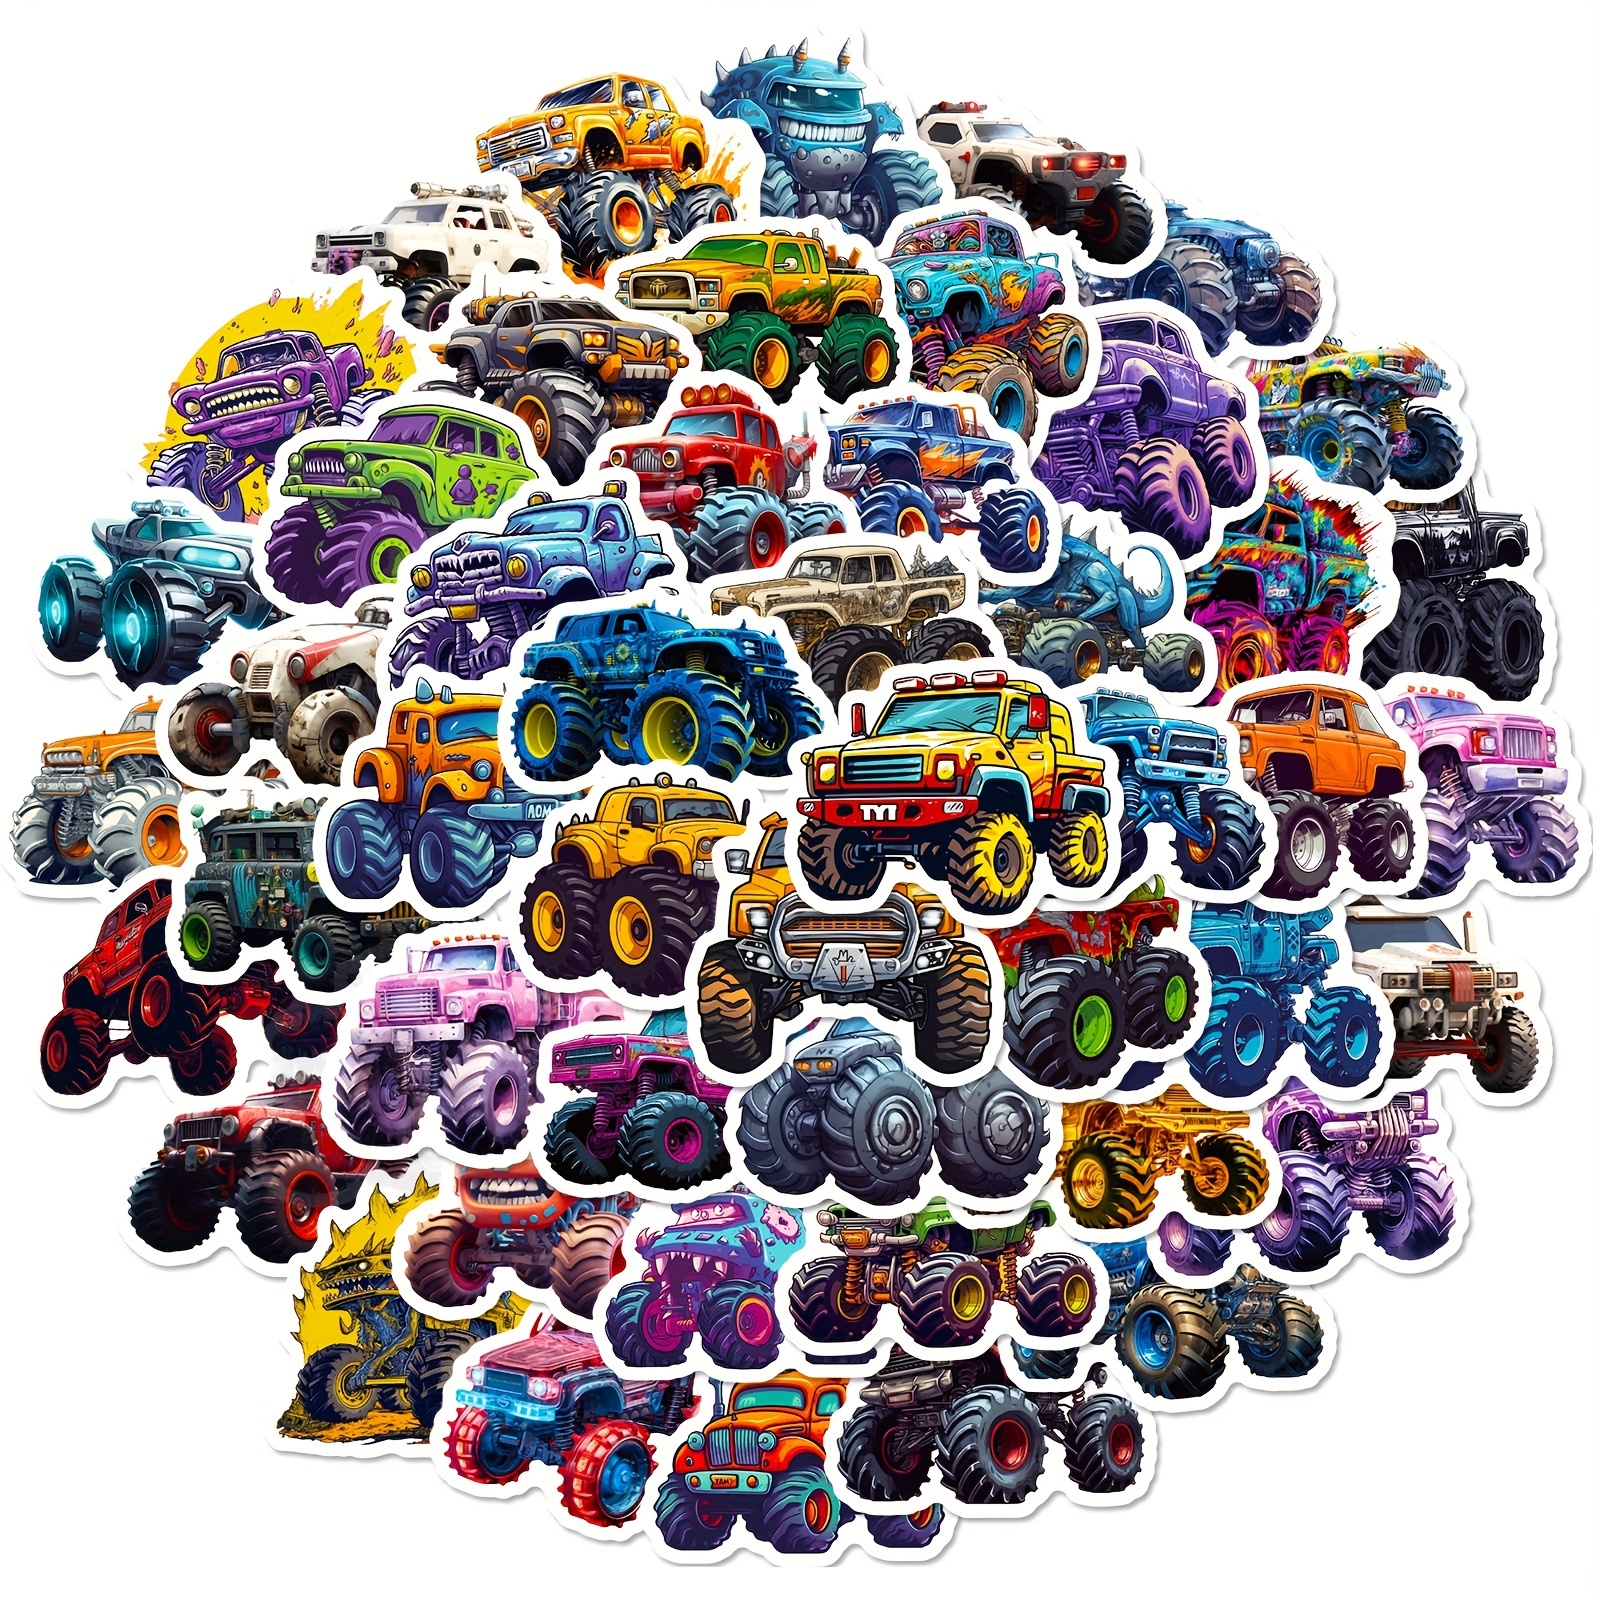 

50pcs Monster Truck Stickers, Truck Car Stickers, Car Stickers Waterproof For Water Bottles Skateboard Car Bike Phone Case Laptop Suitcase, Monster Truck Gifts, Party Gifts Easter Gift